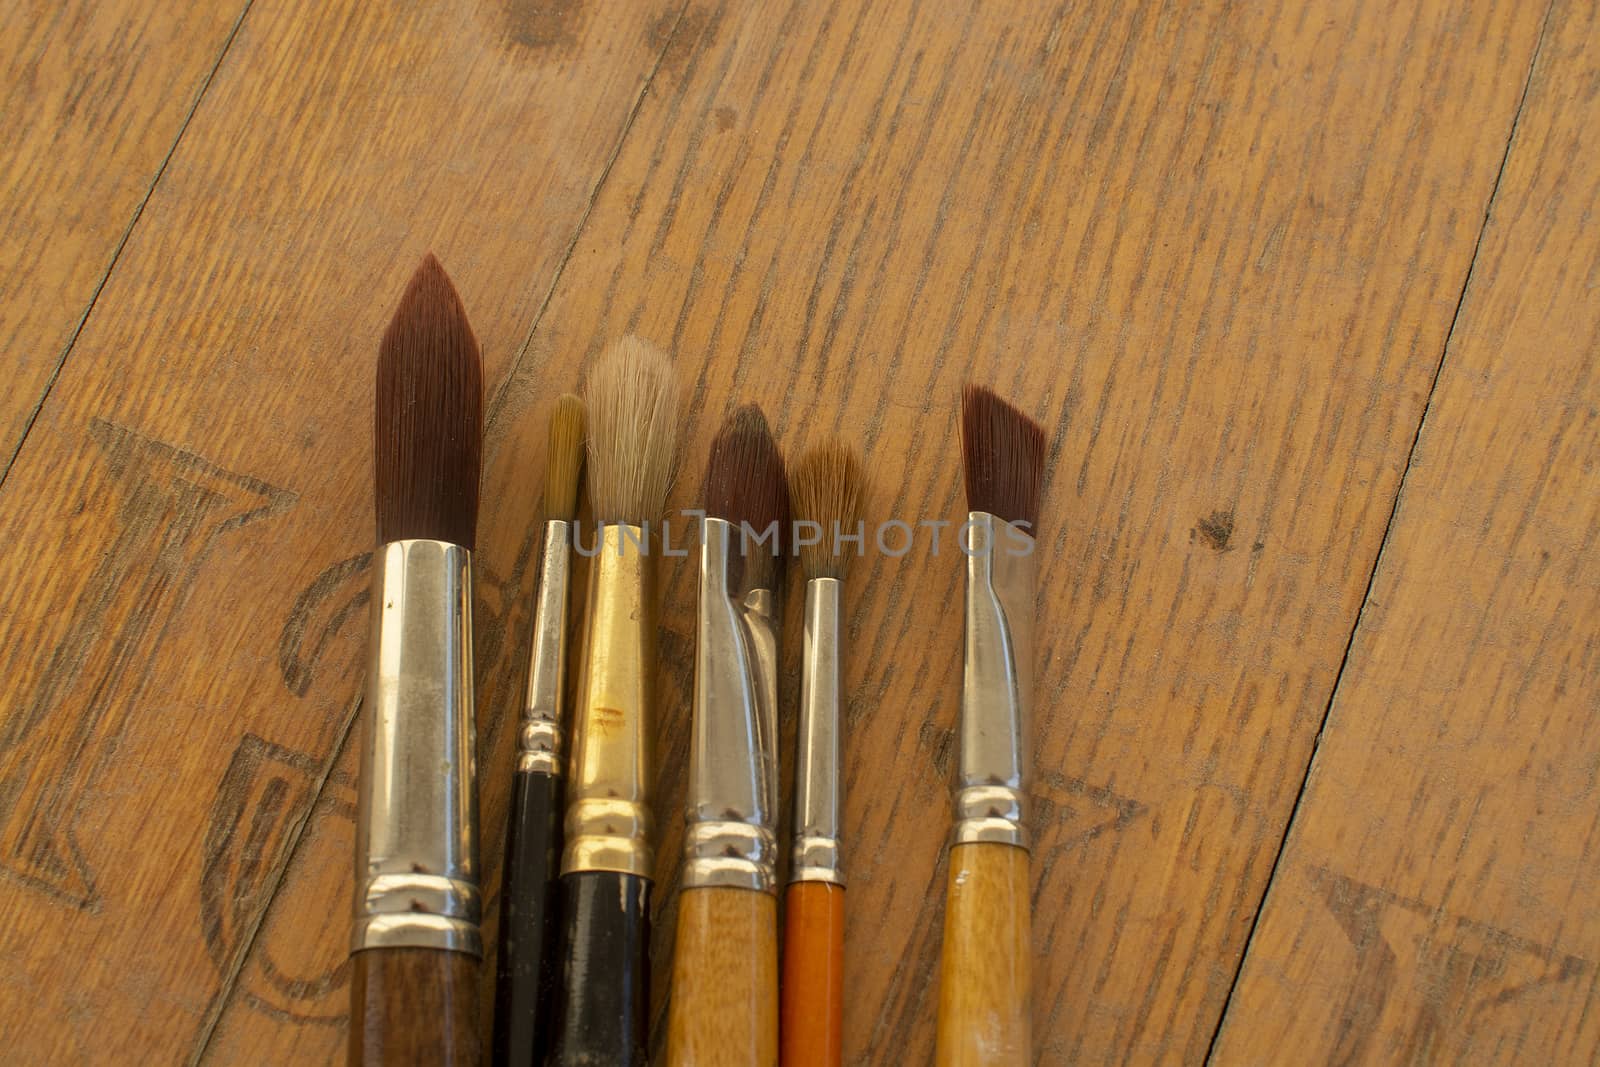 Set of various artist brushes for watercolor painting on old shabby grungy retro vintage wooden background.